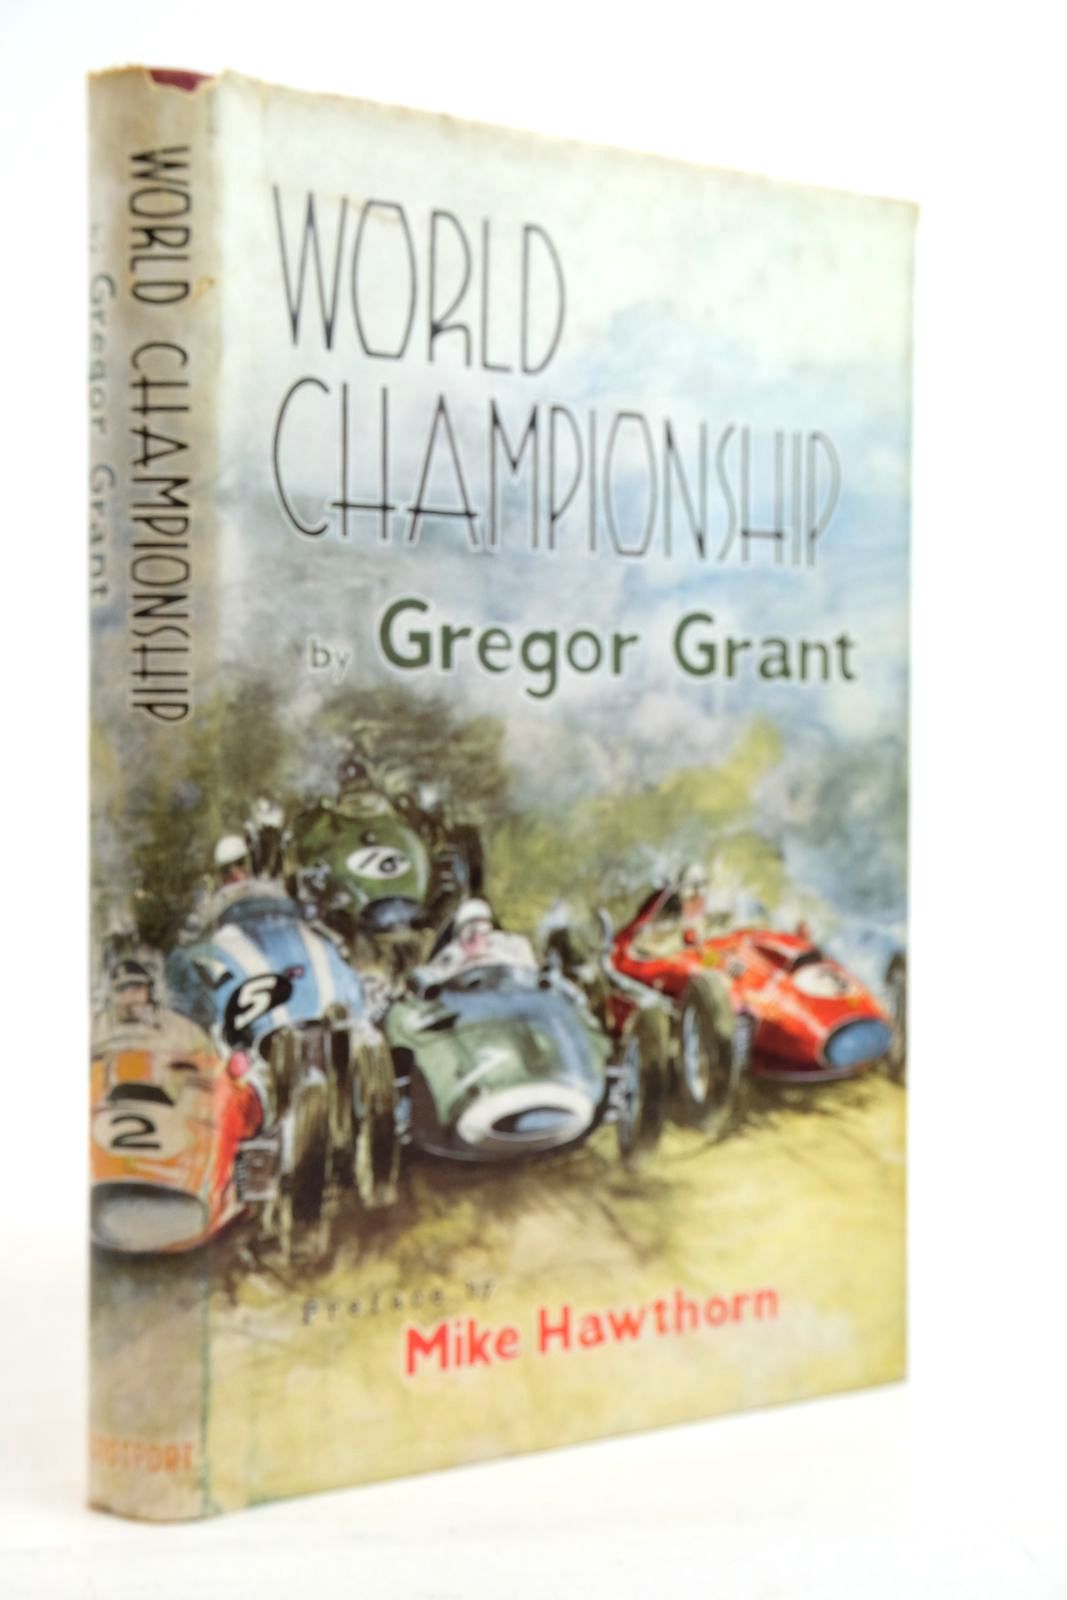 Photo of WORLD CHAMPIONSHIP written by Grant, Gregor published by Autosport (STOCK CODE: 2134624)  for sale by Stella & Rose's Books